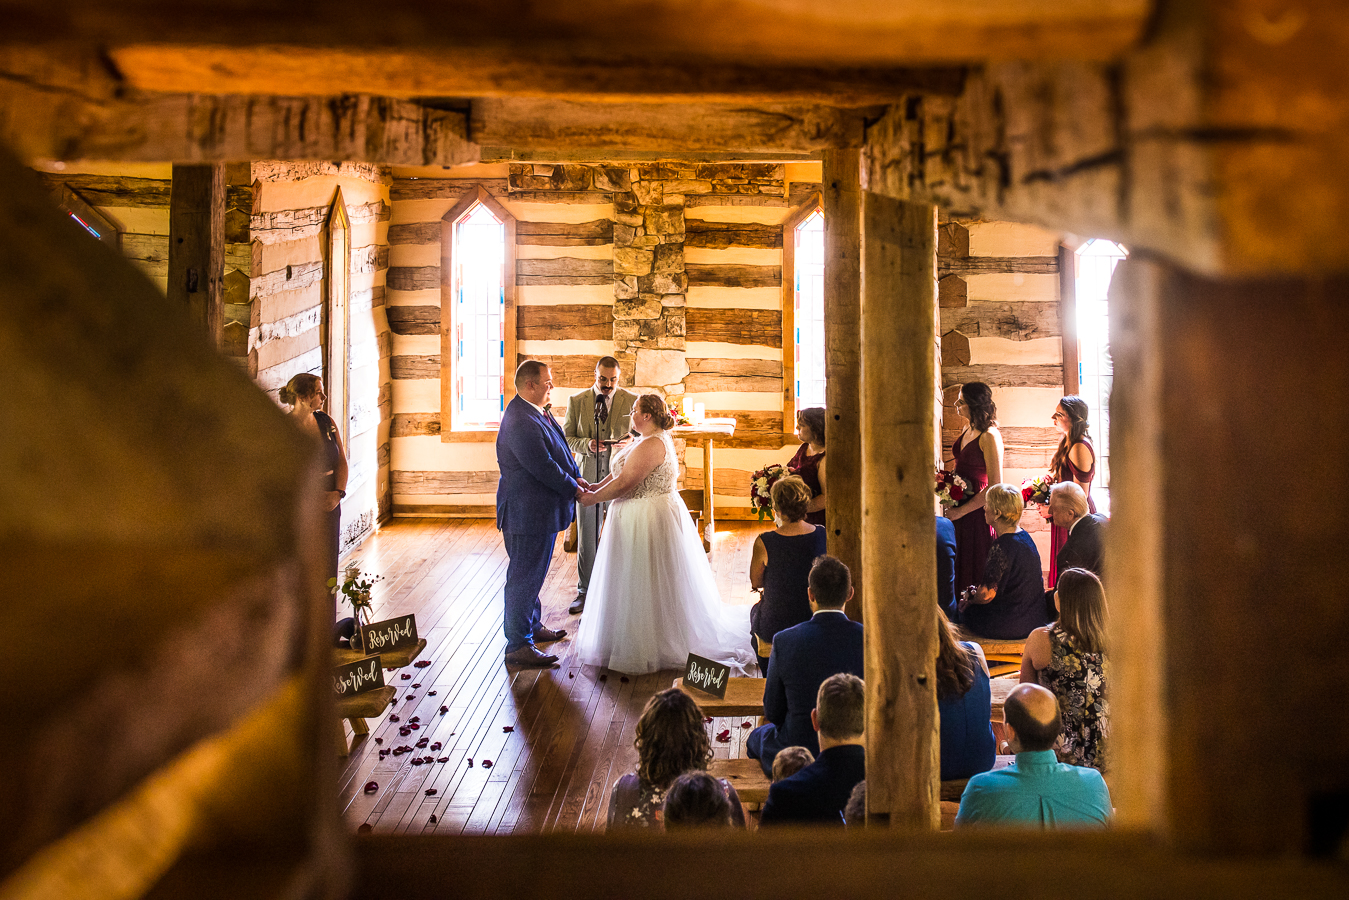 Oak Lodge Wedding Photographer, rhinehart photography, captures this cozy, intimate image of the bride and groom holding hands during their wedding ceremony in this cozy, intimate chapel at oak lodge in stahlstown, pa 